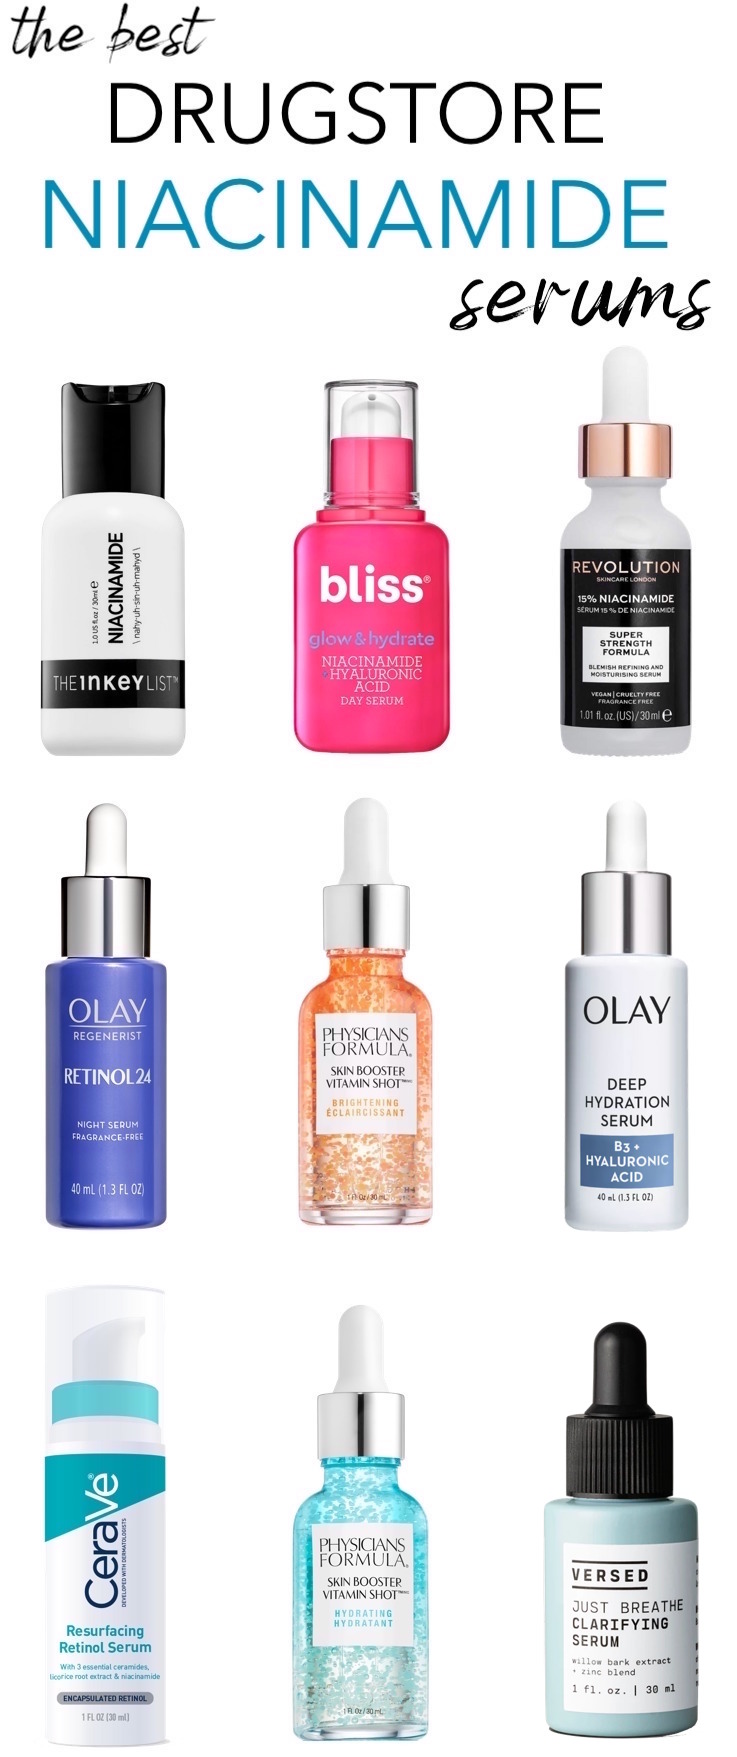 Best Drugstore Niacinamide Serums For Blemishes and Large Pores